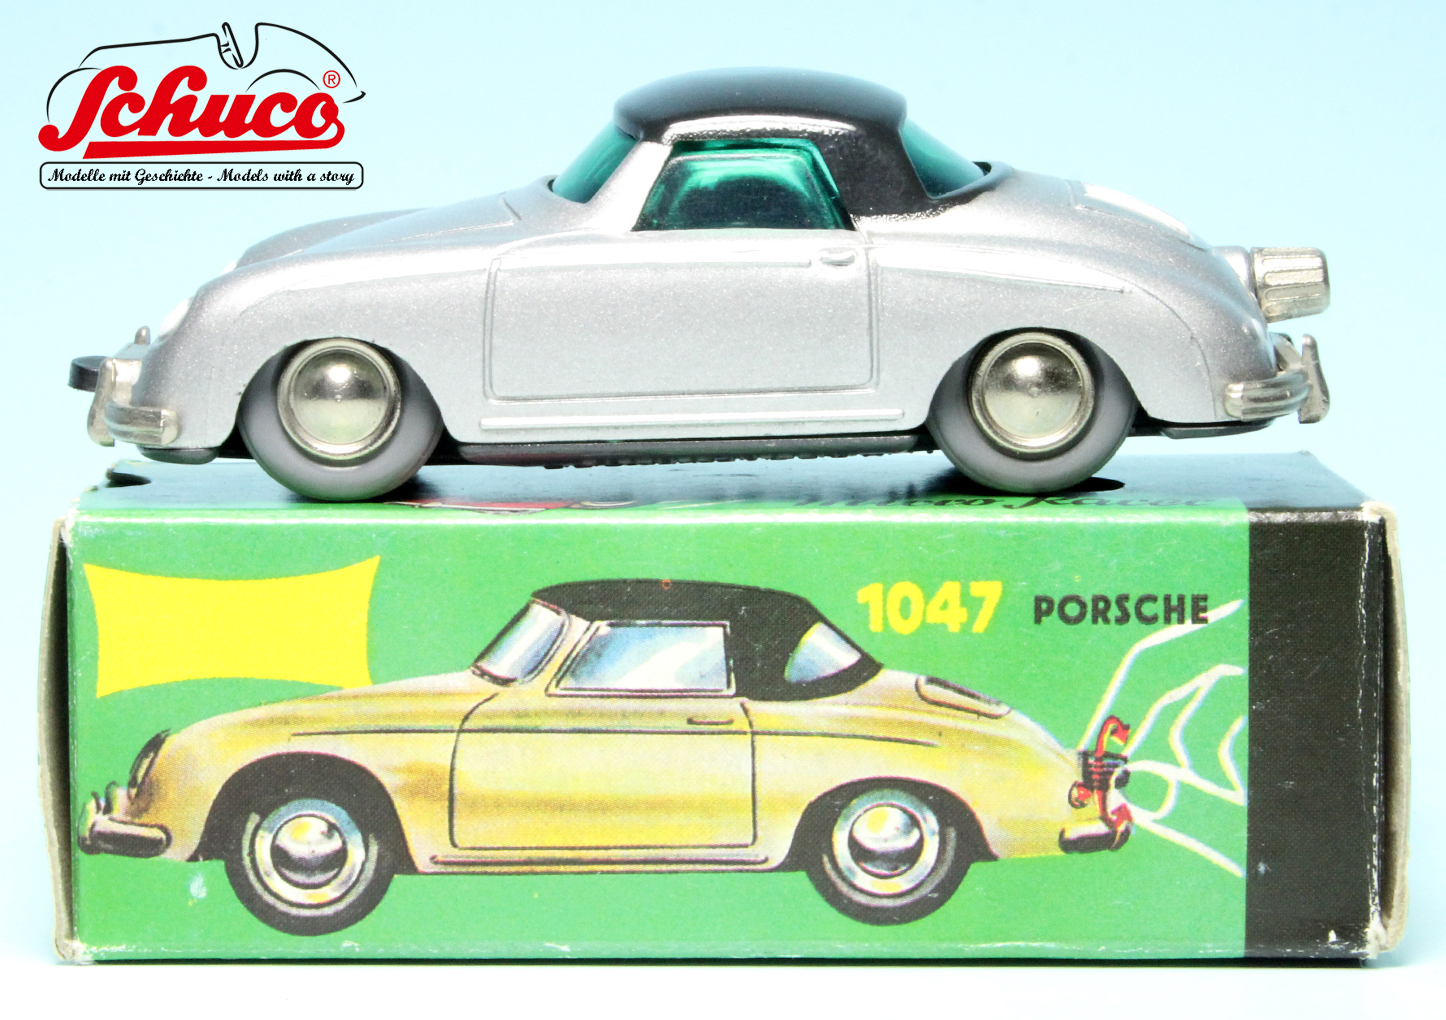 Microracer 1047 / Porsche 356 Coupé | Models with a story | Classic Tin ...